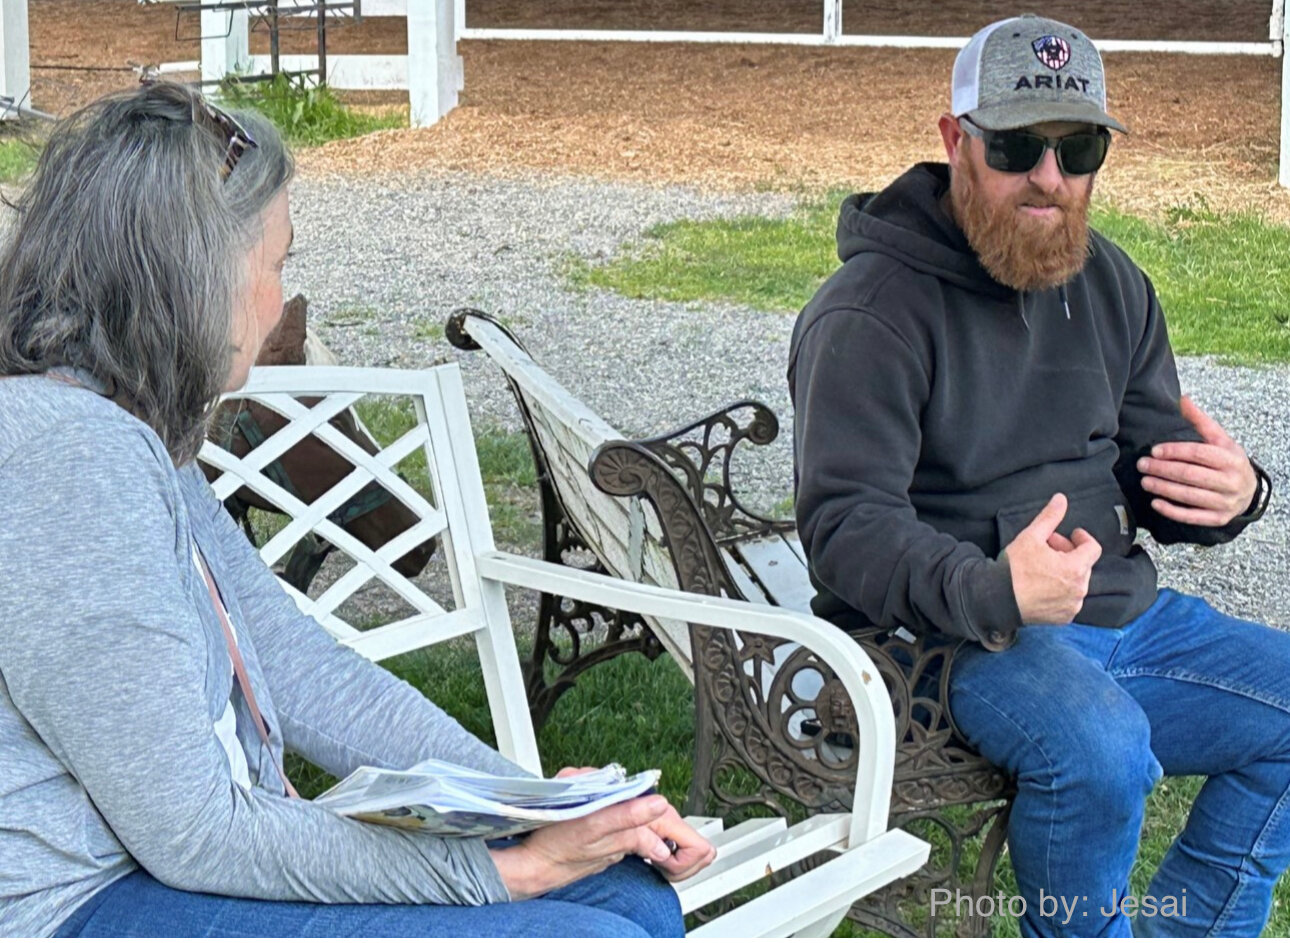 Joshua Dietz explains to Shirley Stirling of the JOLT how Hope for Heroes is a place that provides low-key positive support where students want to volunteer and just hang around to visit and relax. And it fosters friendship among the participants.  May 24, 2023.